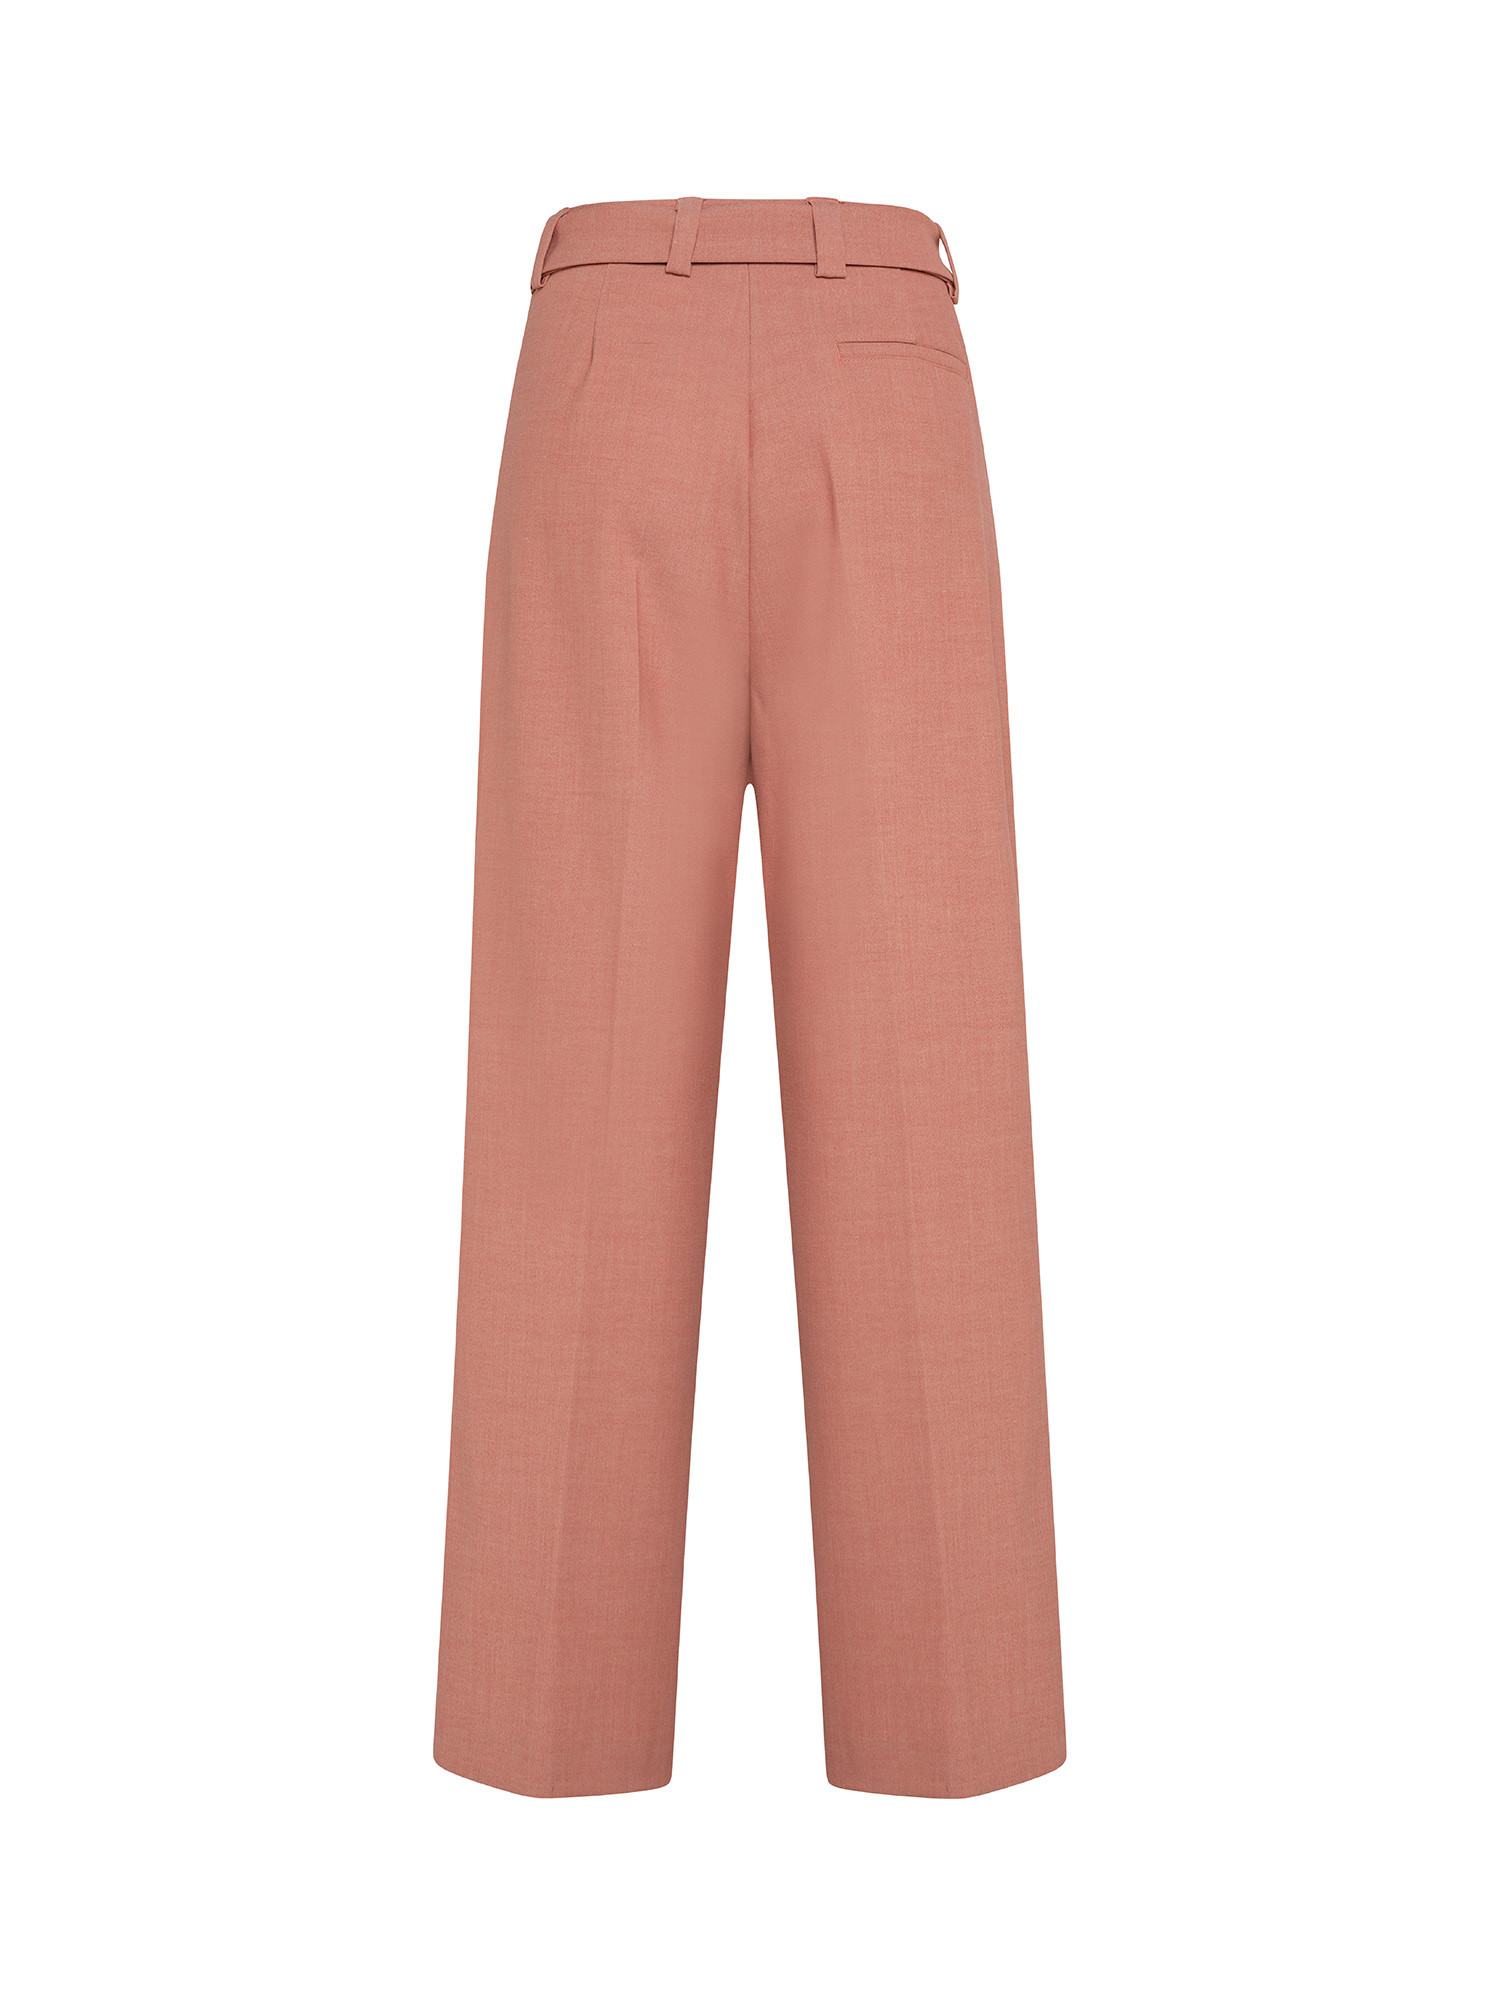 Multicolor pied de poule trousers in polyester-viscose blend with wide leg, Pink, large image number 1